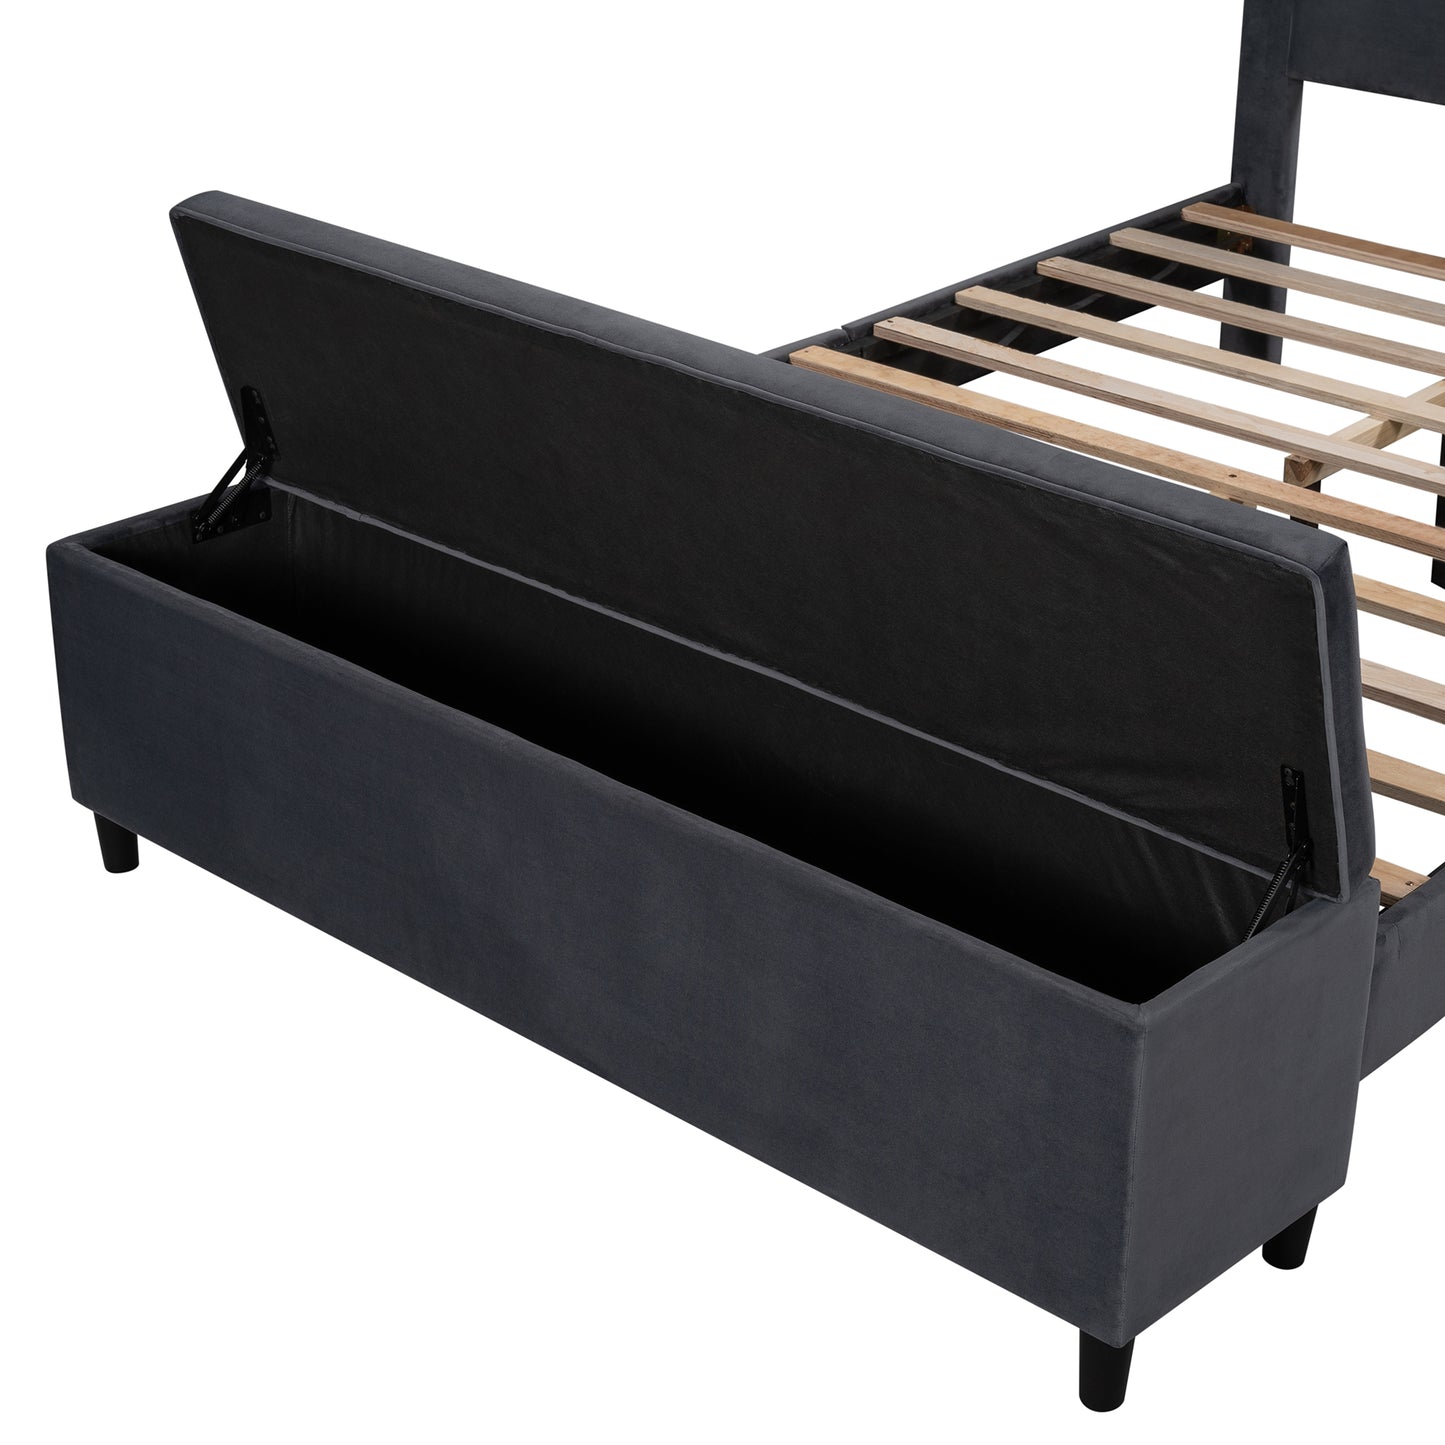 Queen-size Dark Gray Upholstered Platform Bed and Cushioned Ottoman with Storage